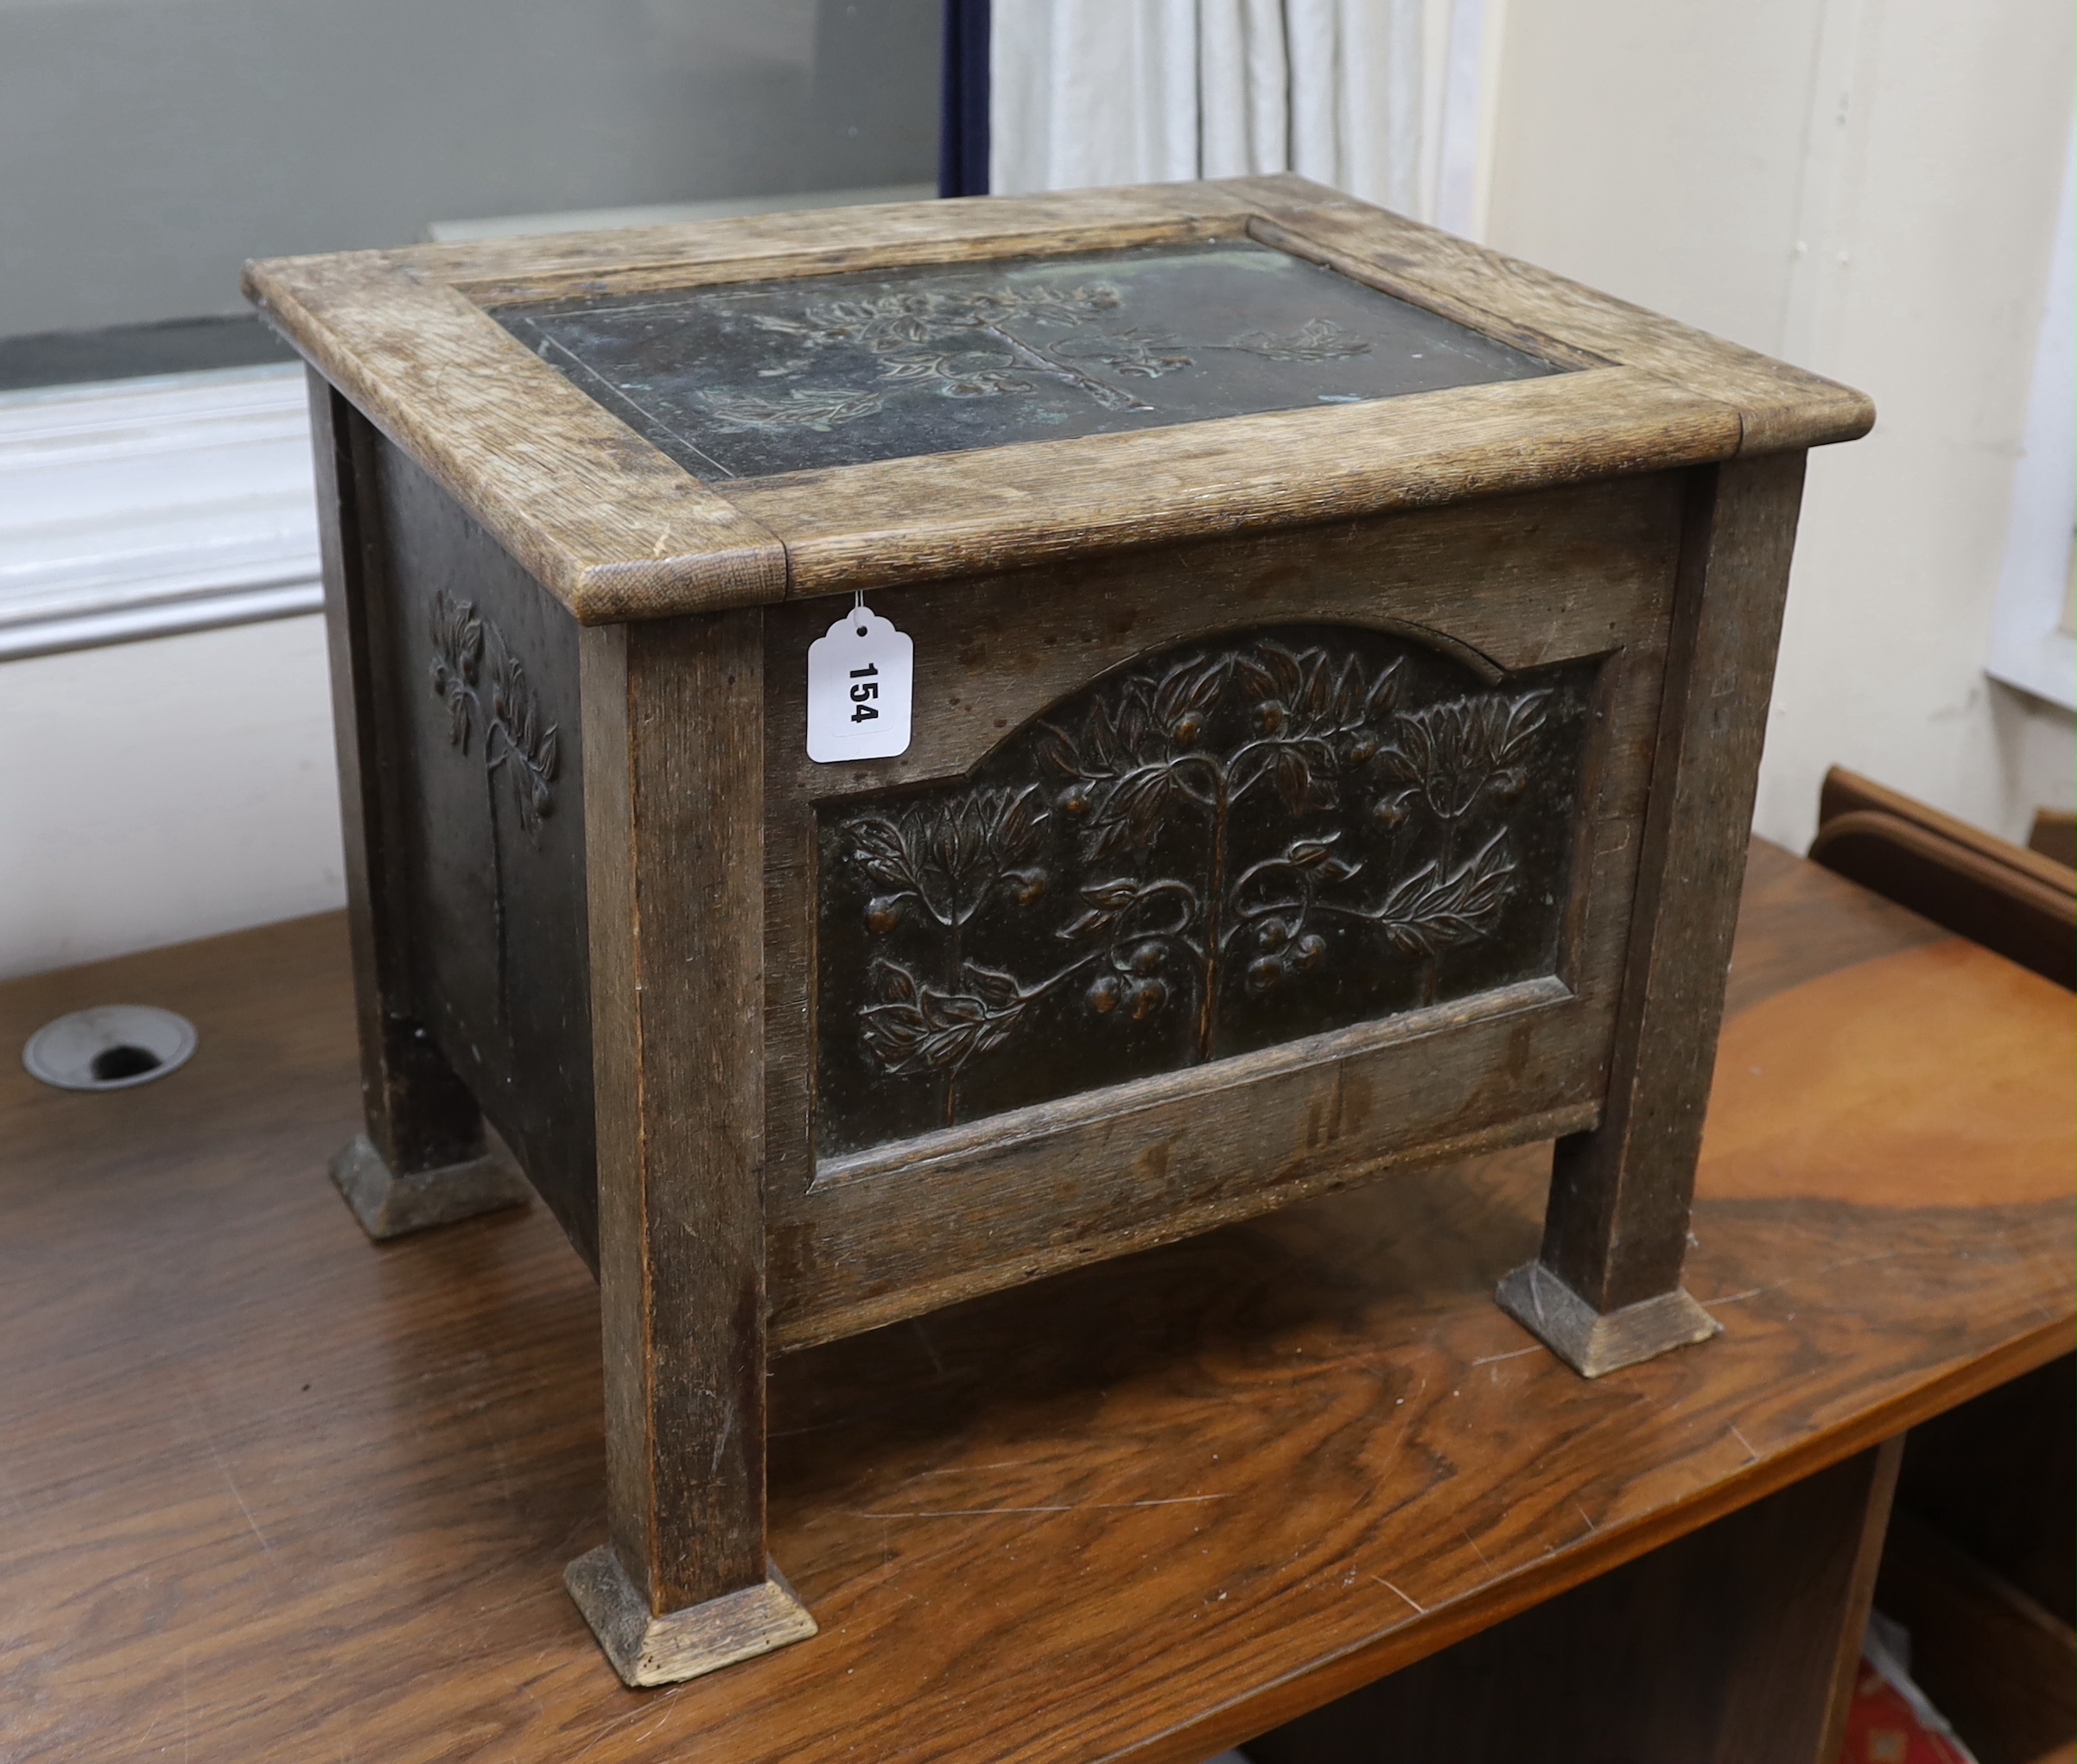 An Arts and Crafts oak and embossed copper coal box, width 54cm, depth 43cm, height 46cm                                                                                                                                    